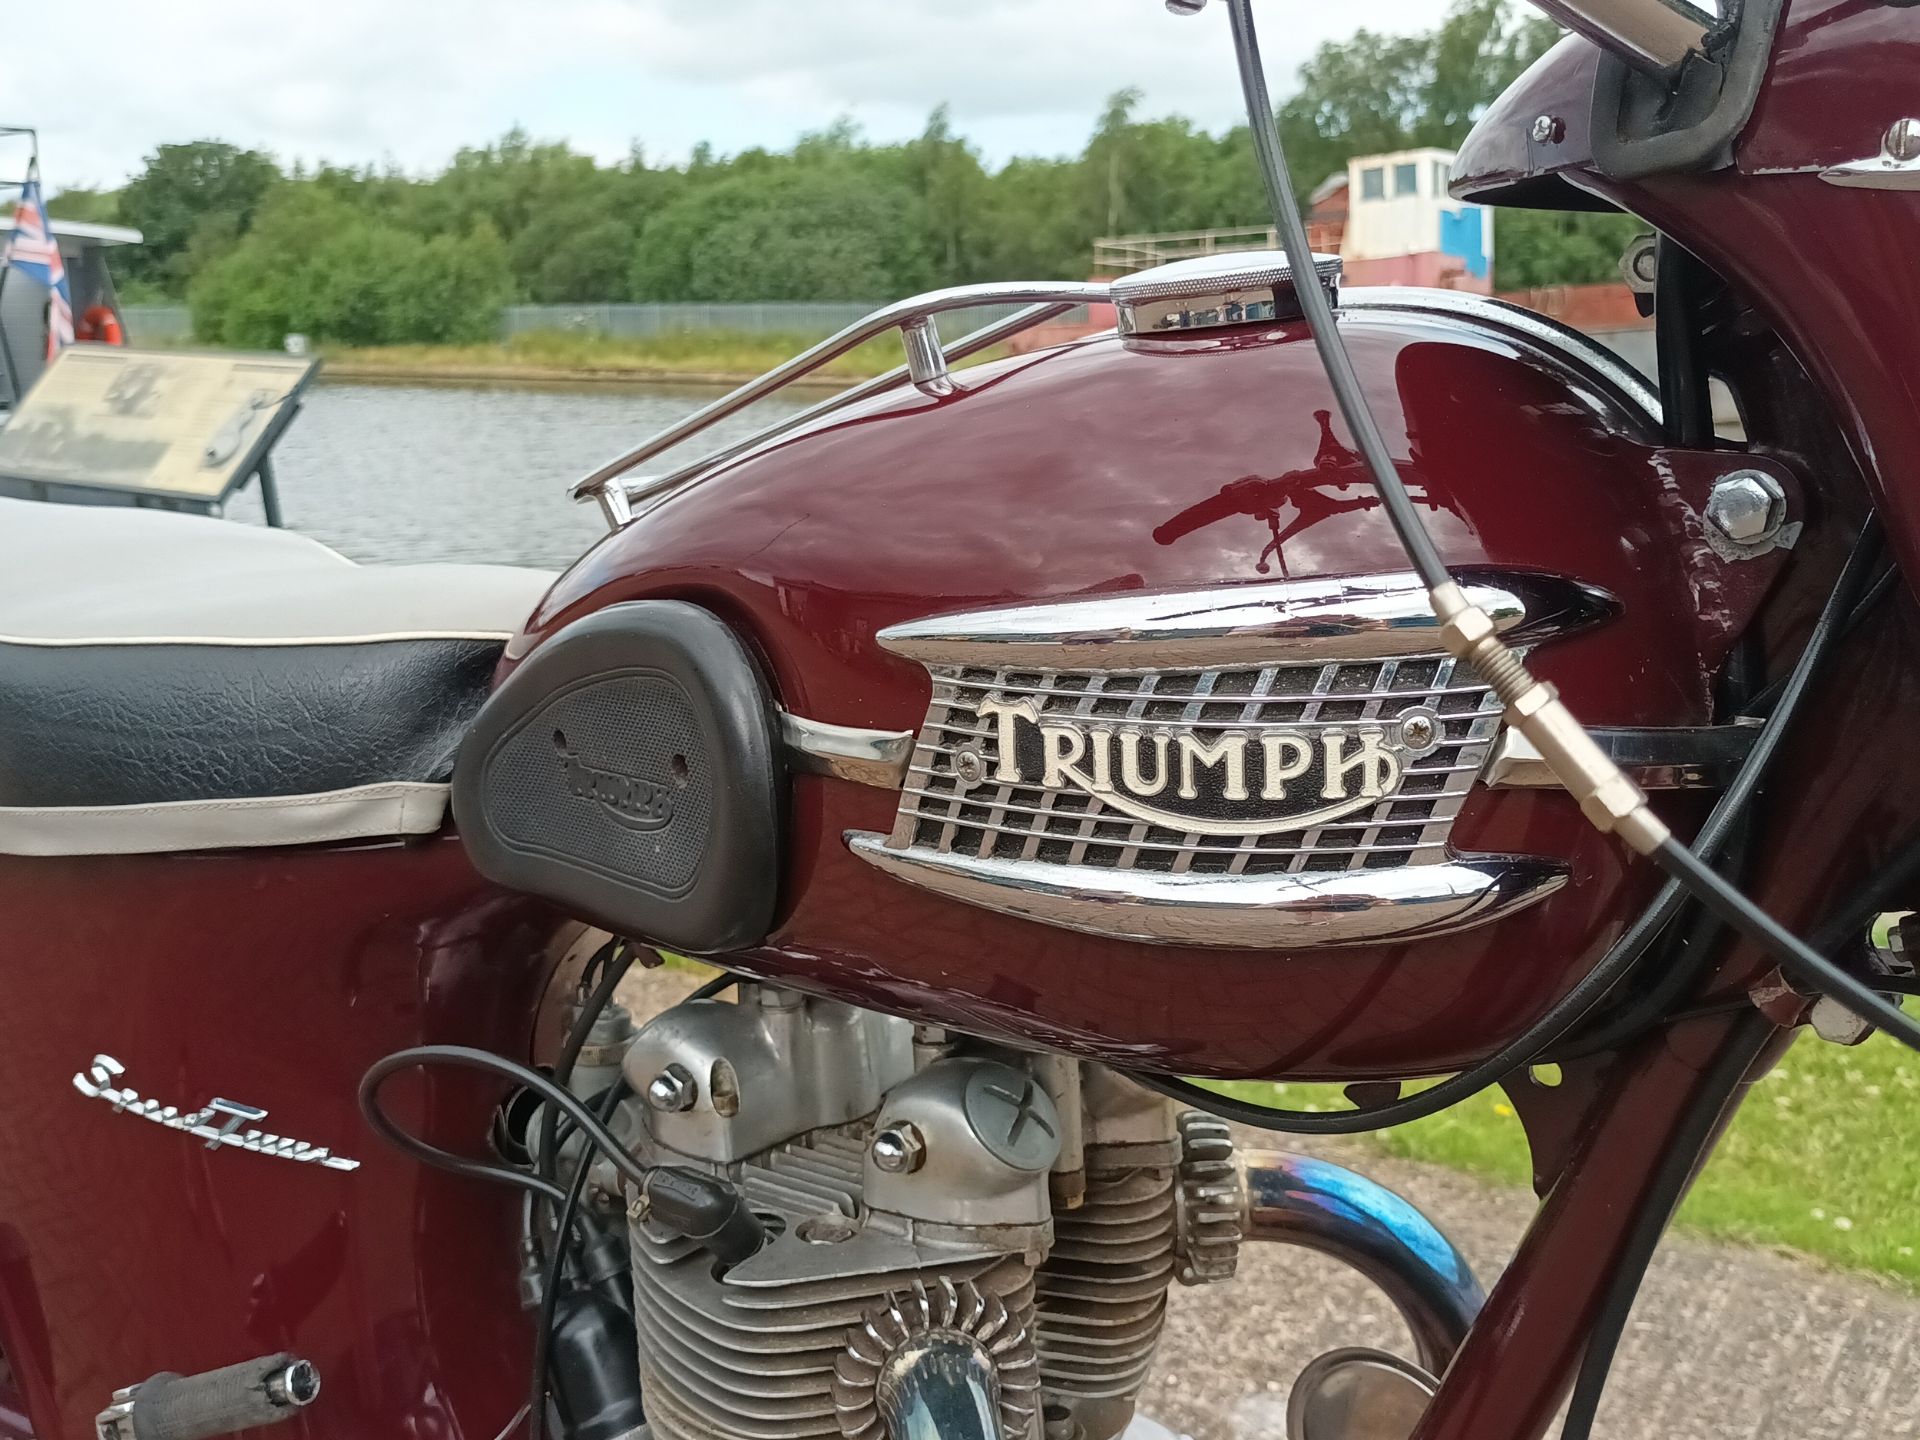 1959 Triumph 5TA Speed Twin, 500cc. Registration number 418 GKE (non transferrable). Frame number - Image 13 of 14